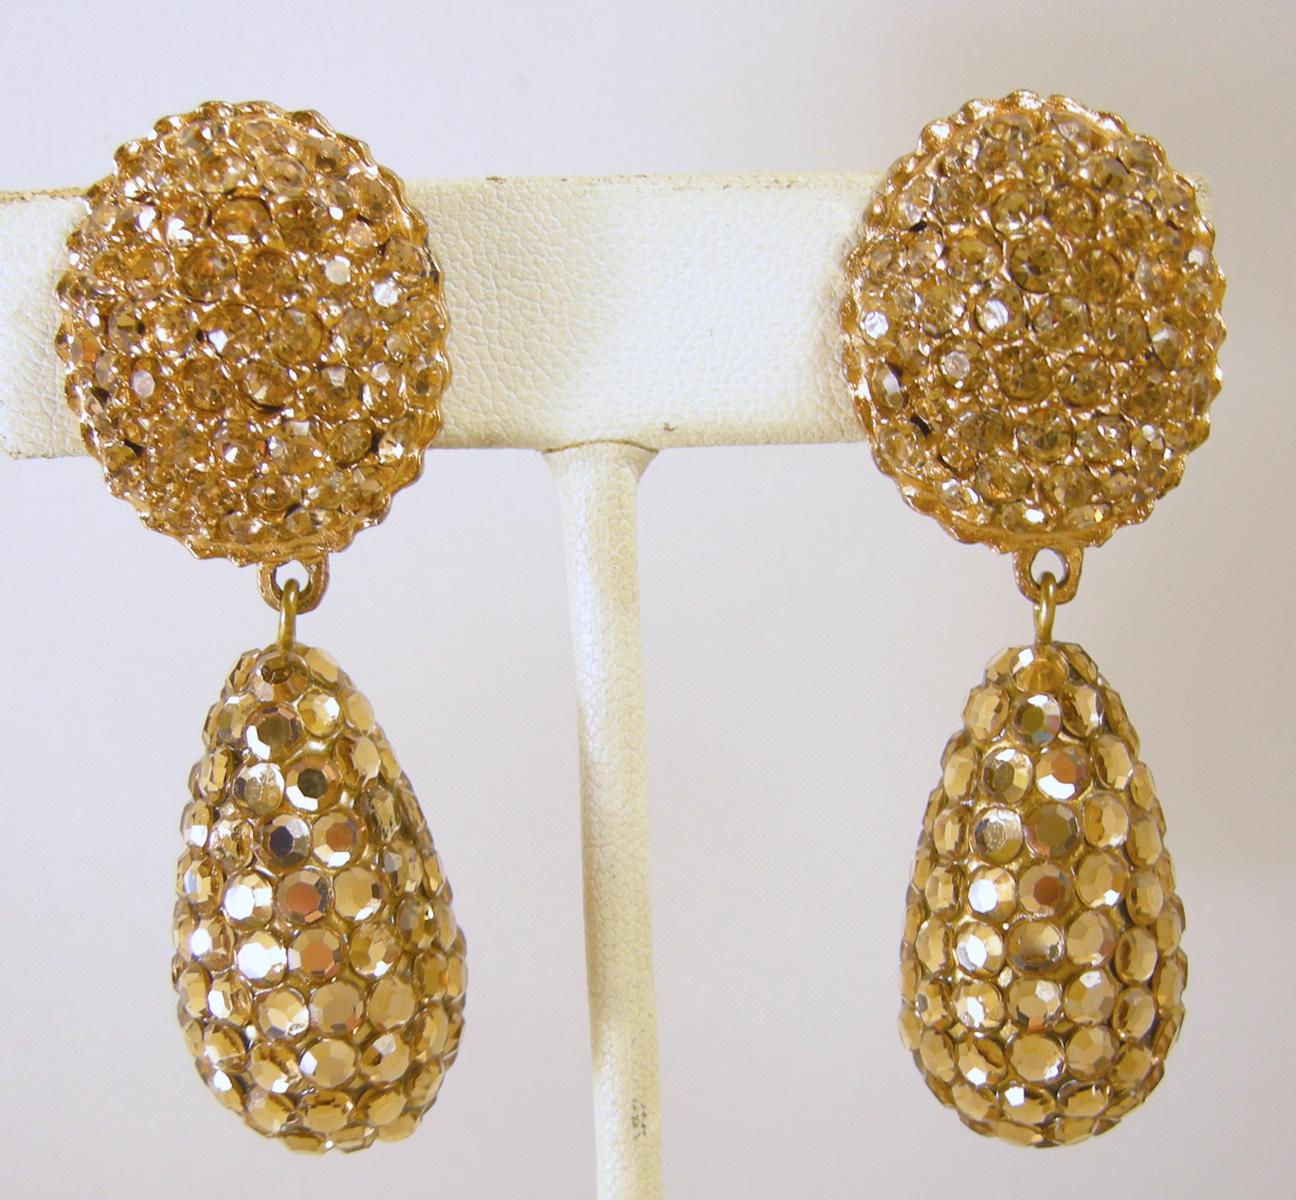 Vintage 60s Gold Tone Rhinestone Drop Earrings In Excellent Condition For Sale In New York, NY